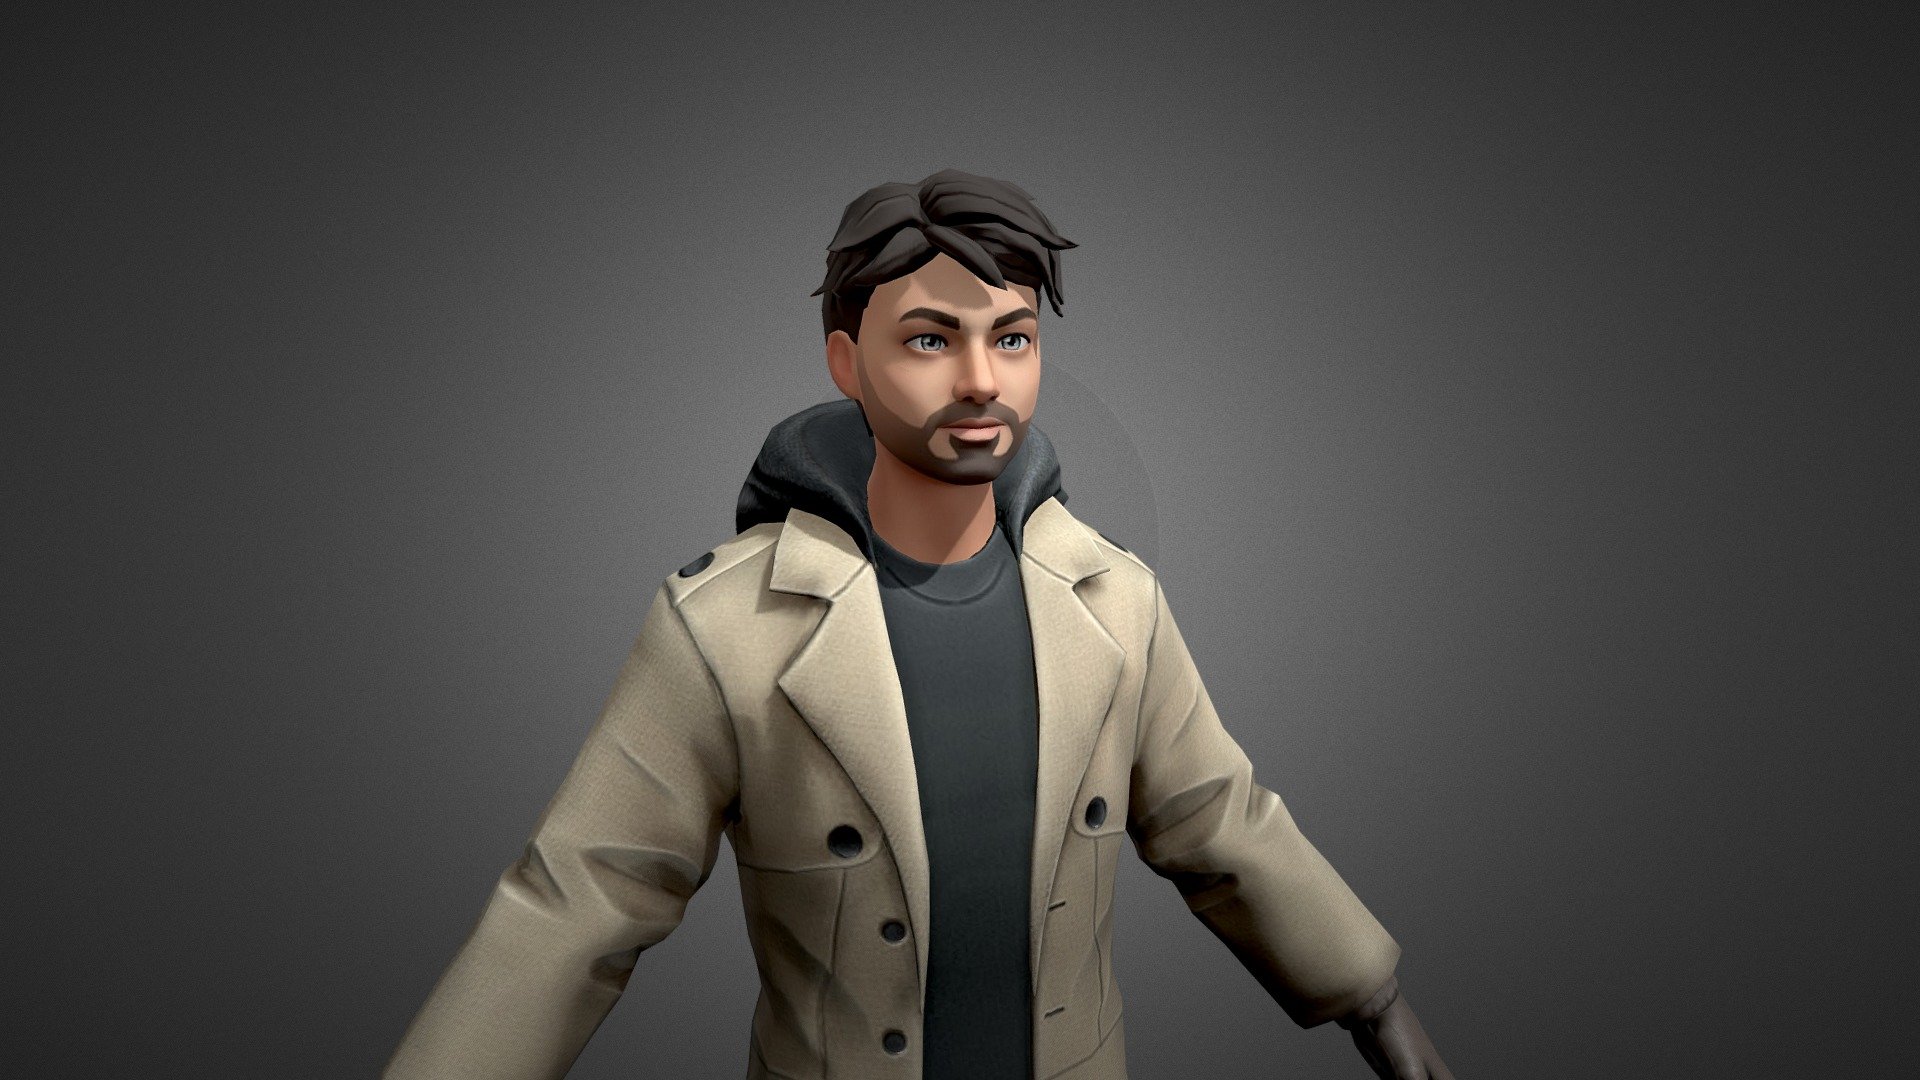 3D model of a Male Character

Free to use

No CopyRight Issue

For more 3D models for free,support us on youtube

Checkout our youtube channel BlendTek :https://www.youtube.com/channel/UC3fl4dO_6bd5YZ8VNO9vZRA
 - Rigged Human Character [Free] - Download Free 3D model by BlendTek (@namfd) 3d model